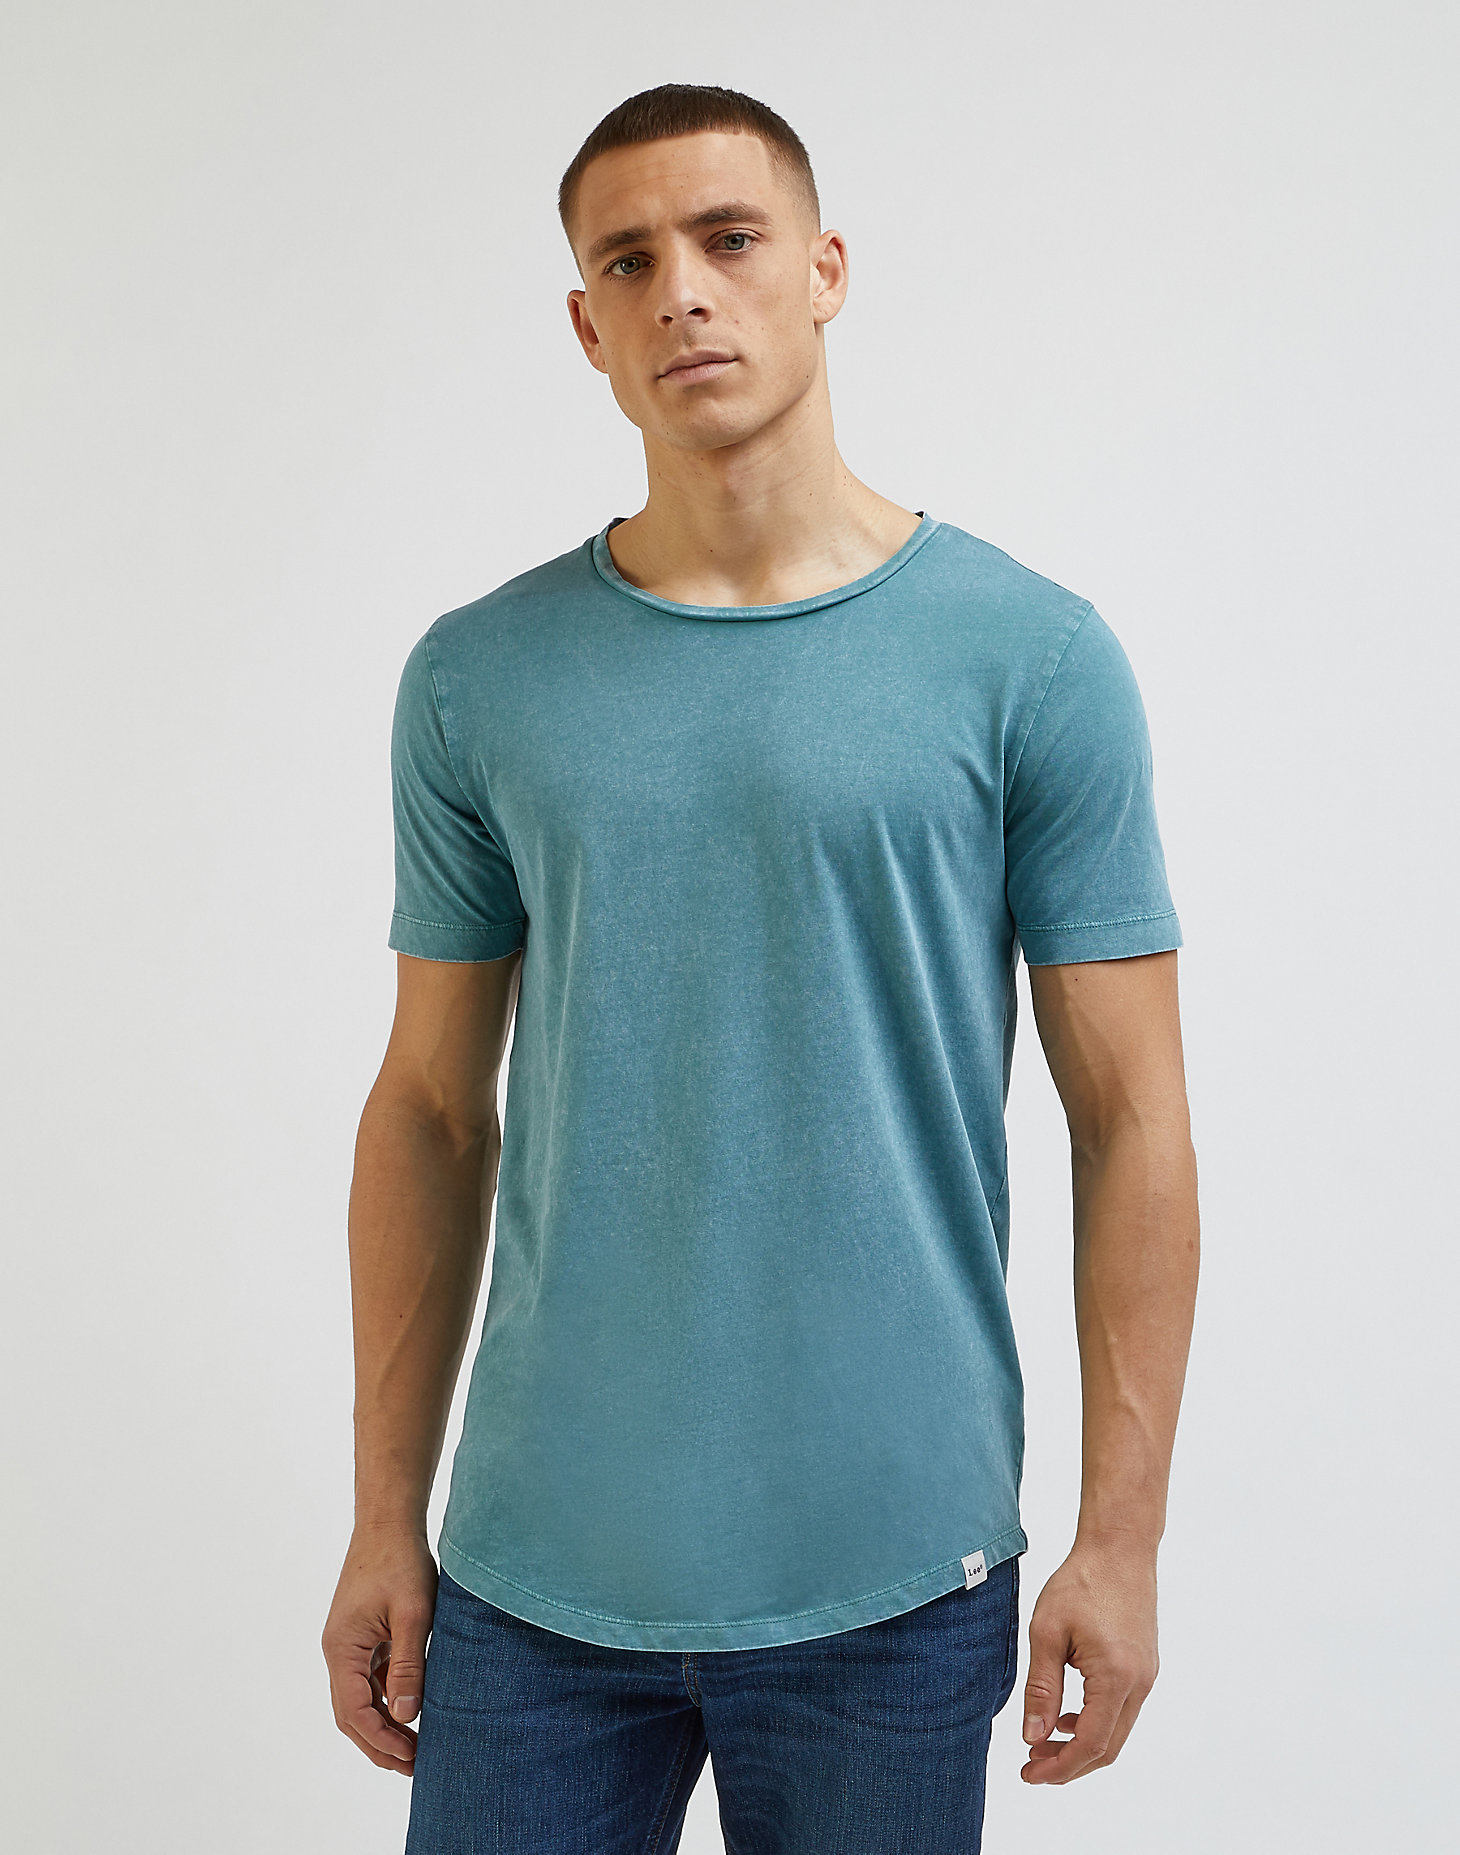 Shaped Tee in Eden main view